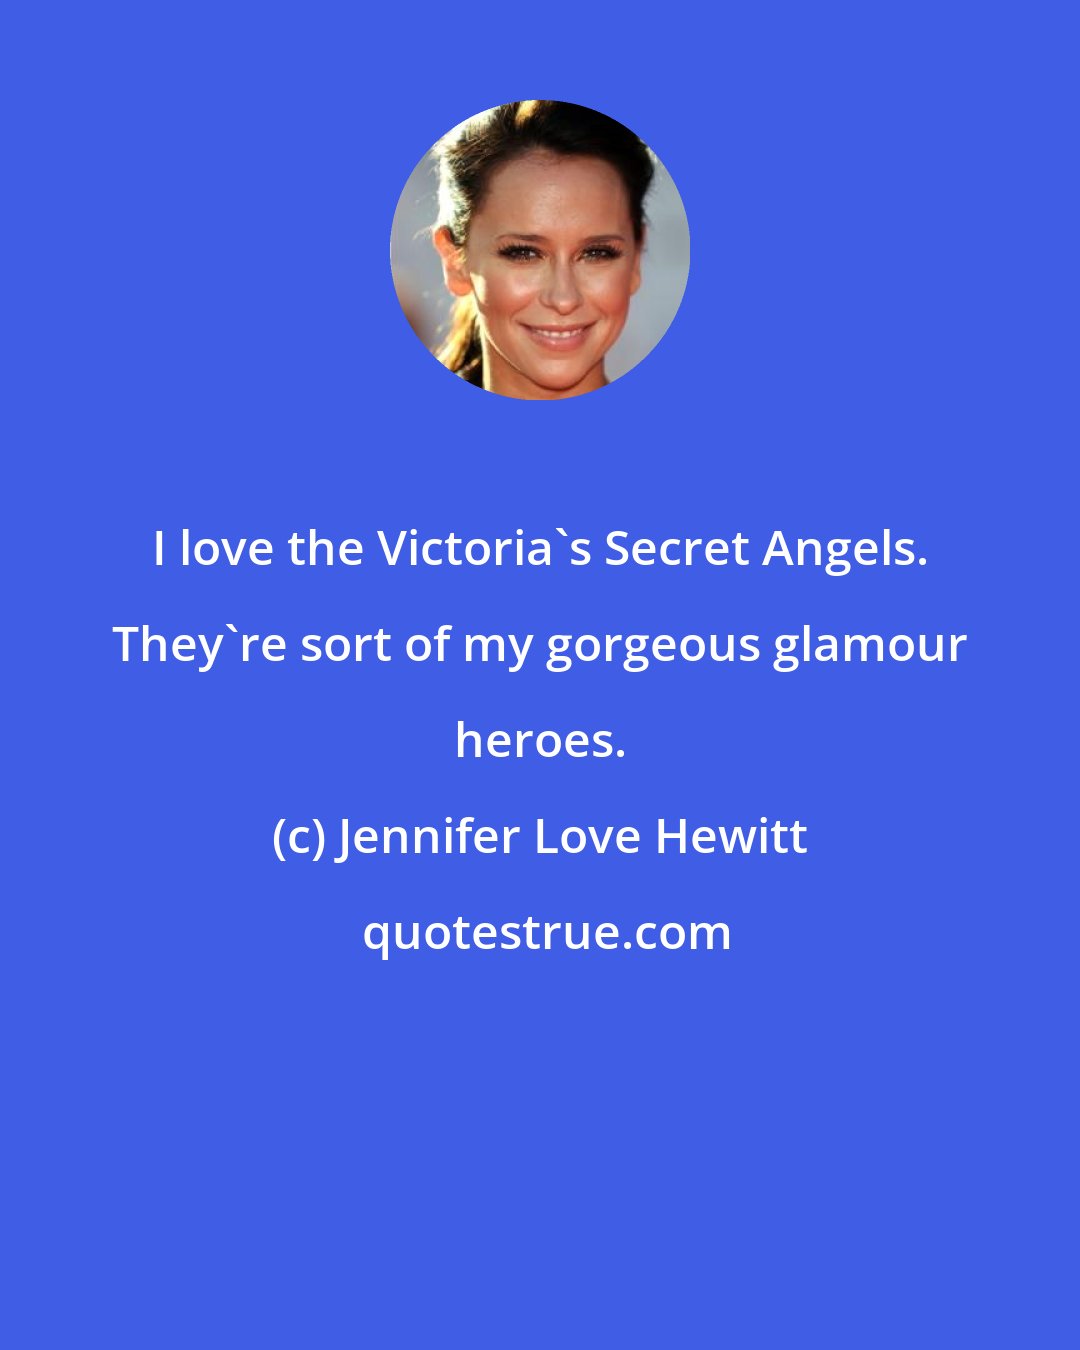 Jennifer Love Hewitt: I love the Victoria's Secret Angels. They're sort of my gorgeous glamour heroes.